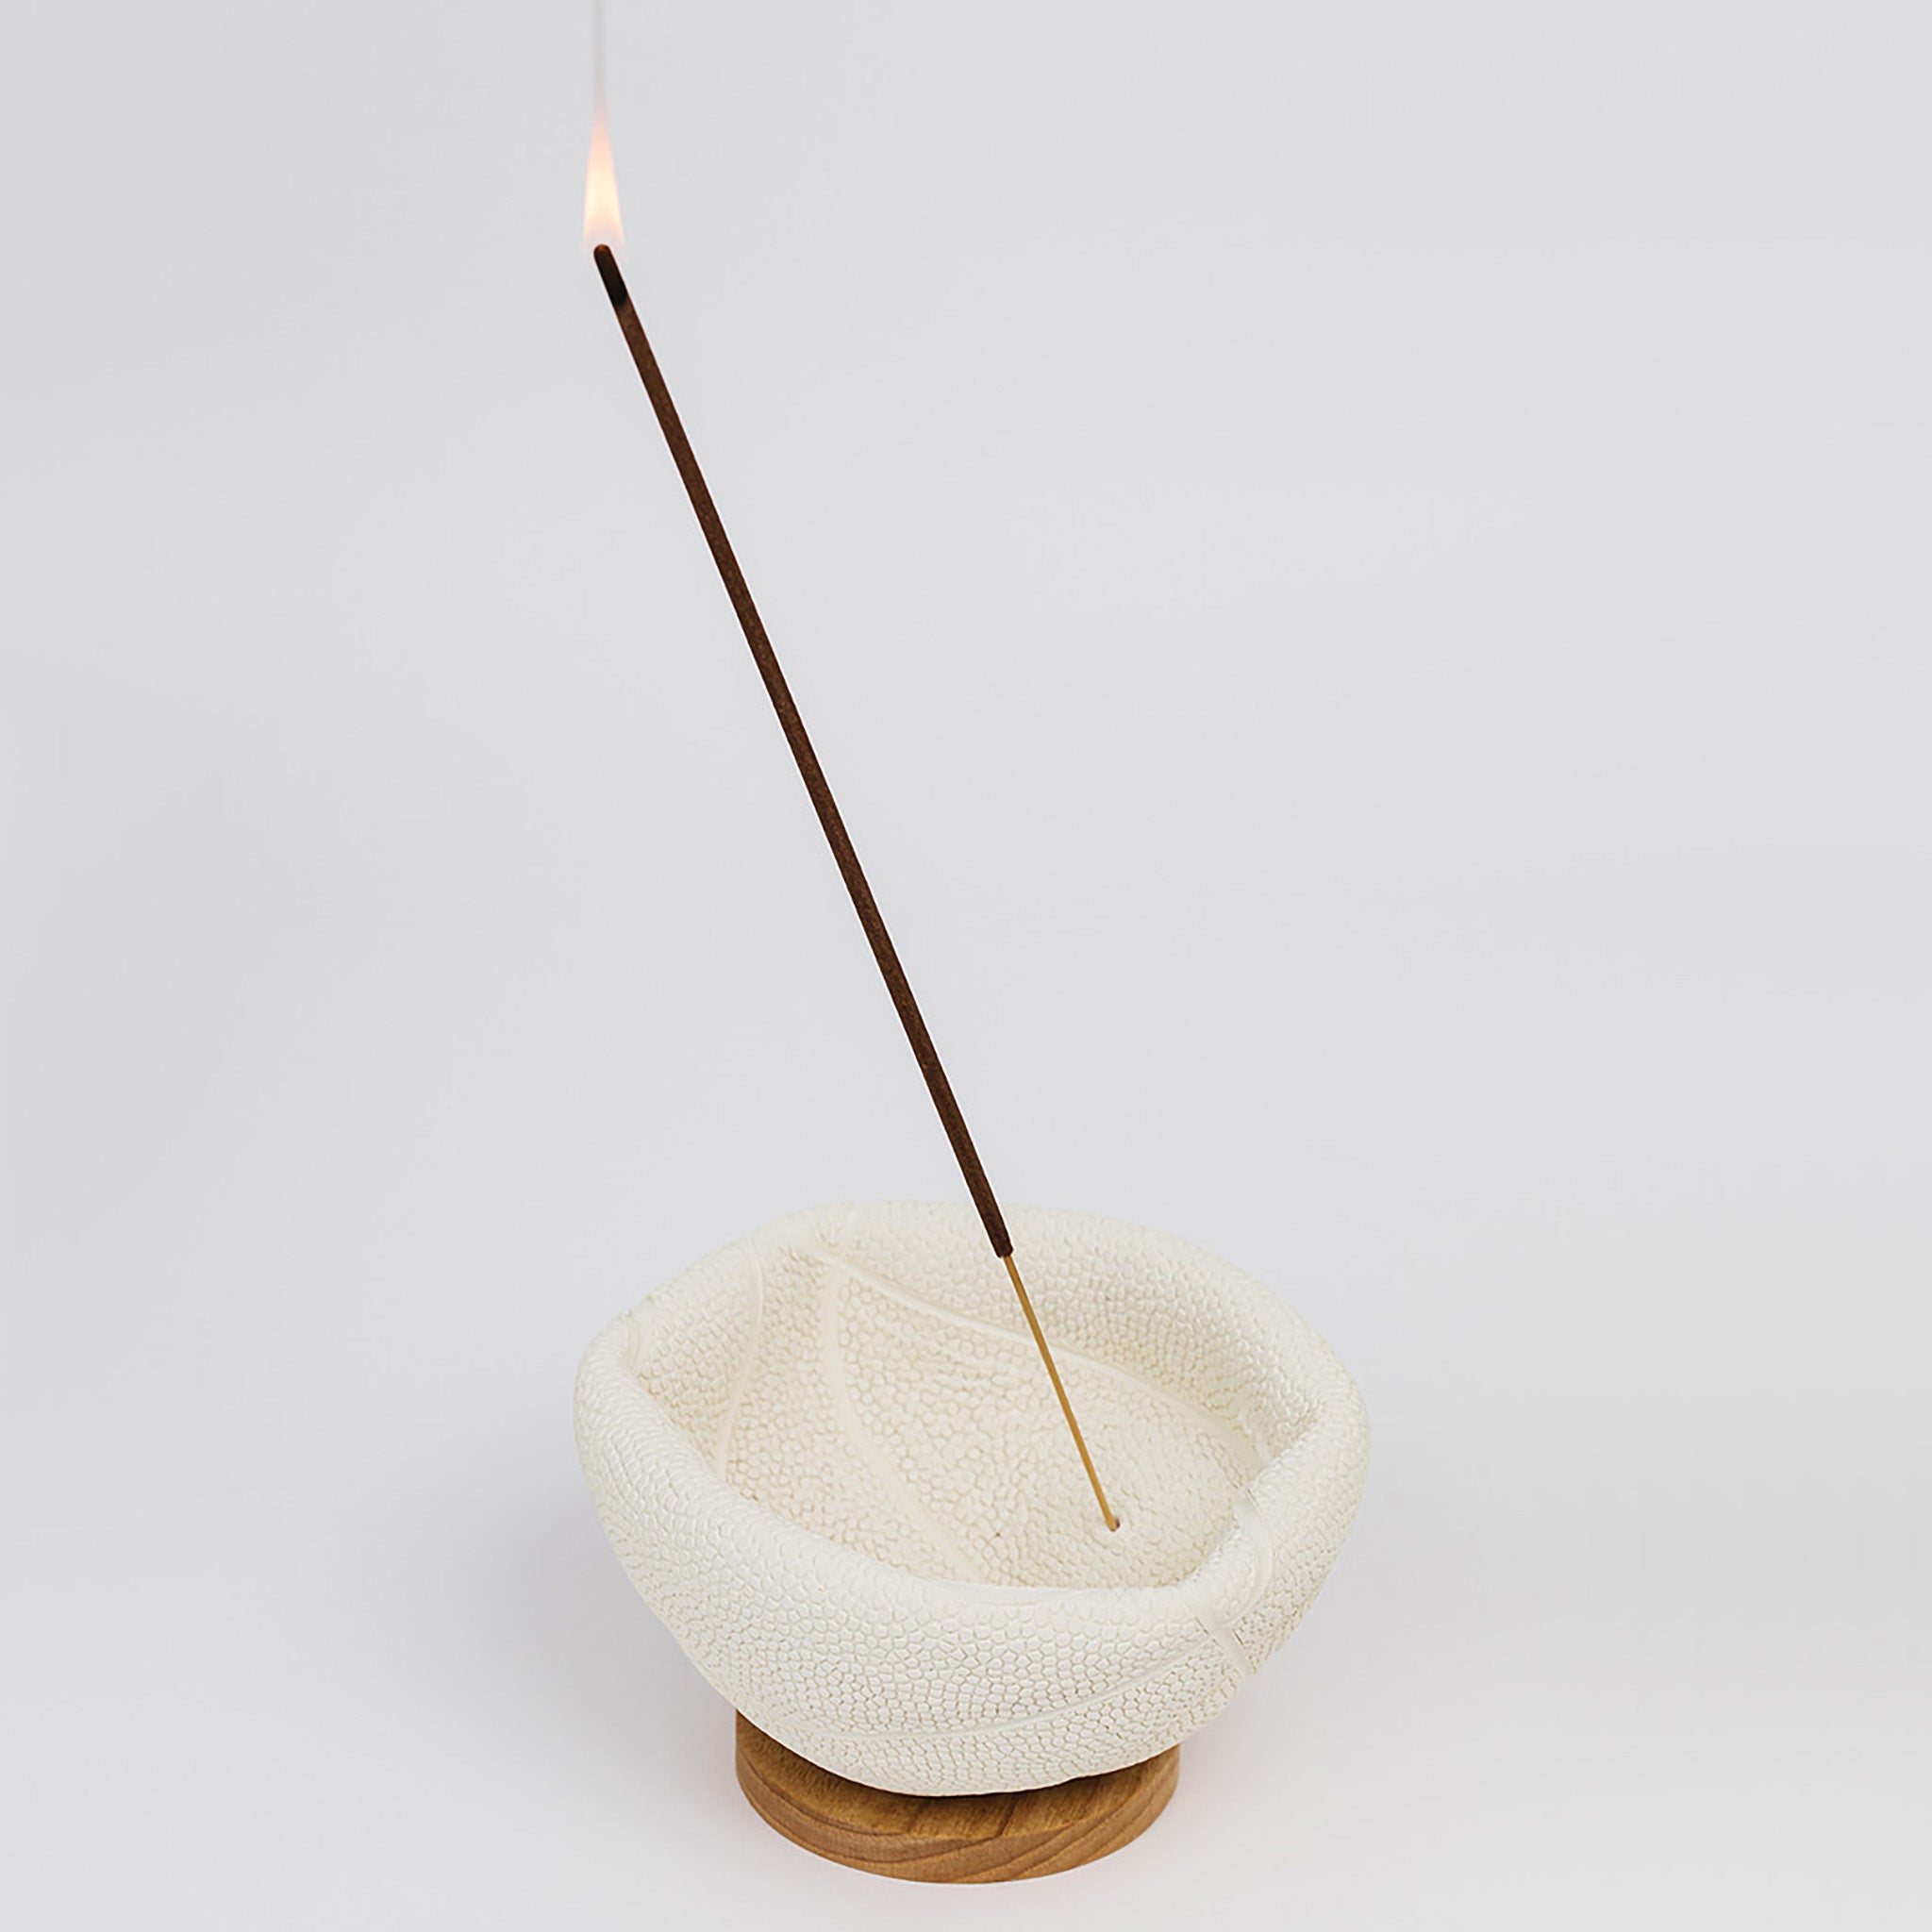 Incense burning in the mini basketball incense holder